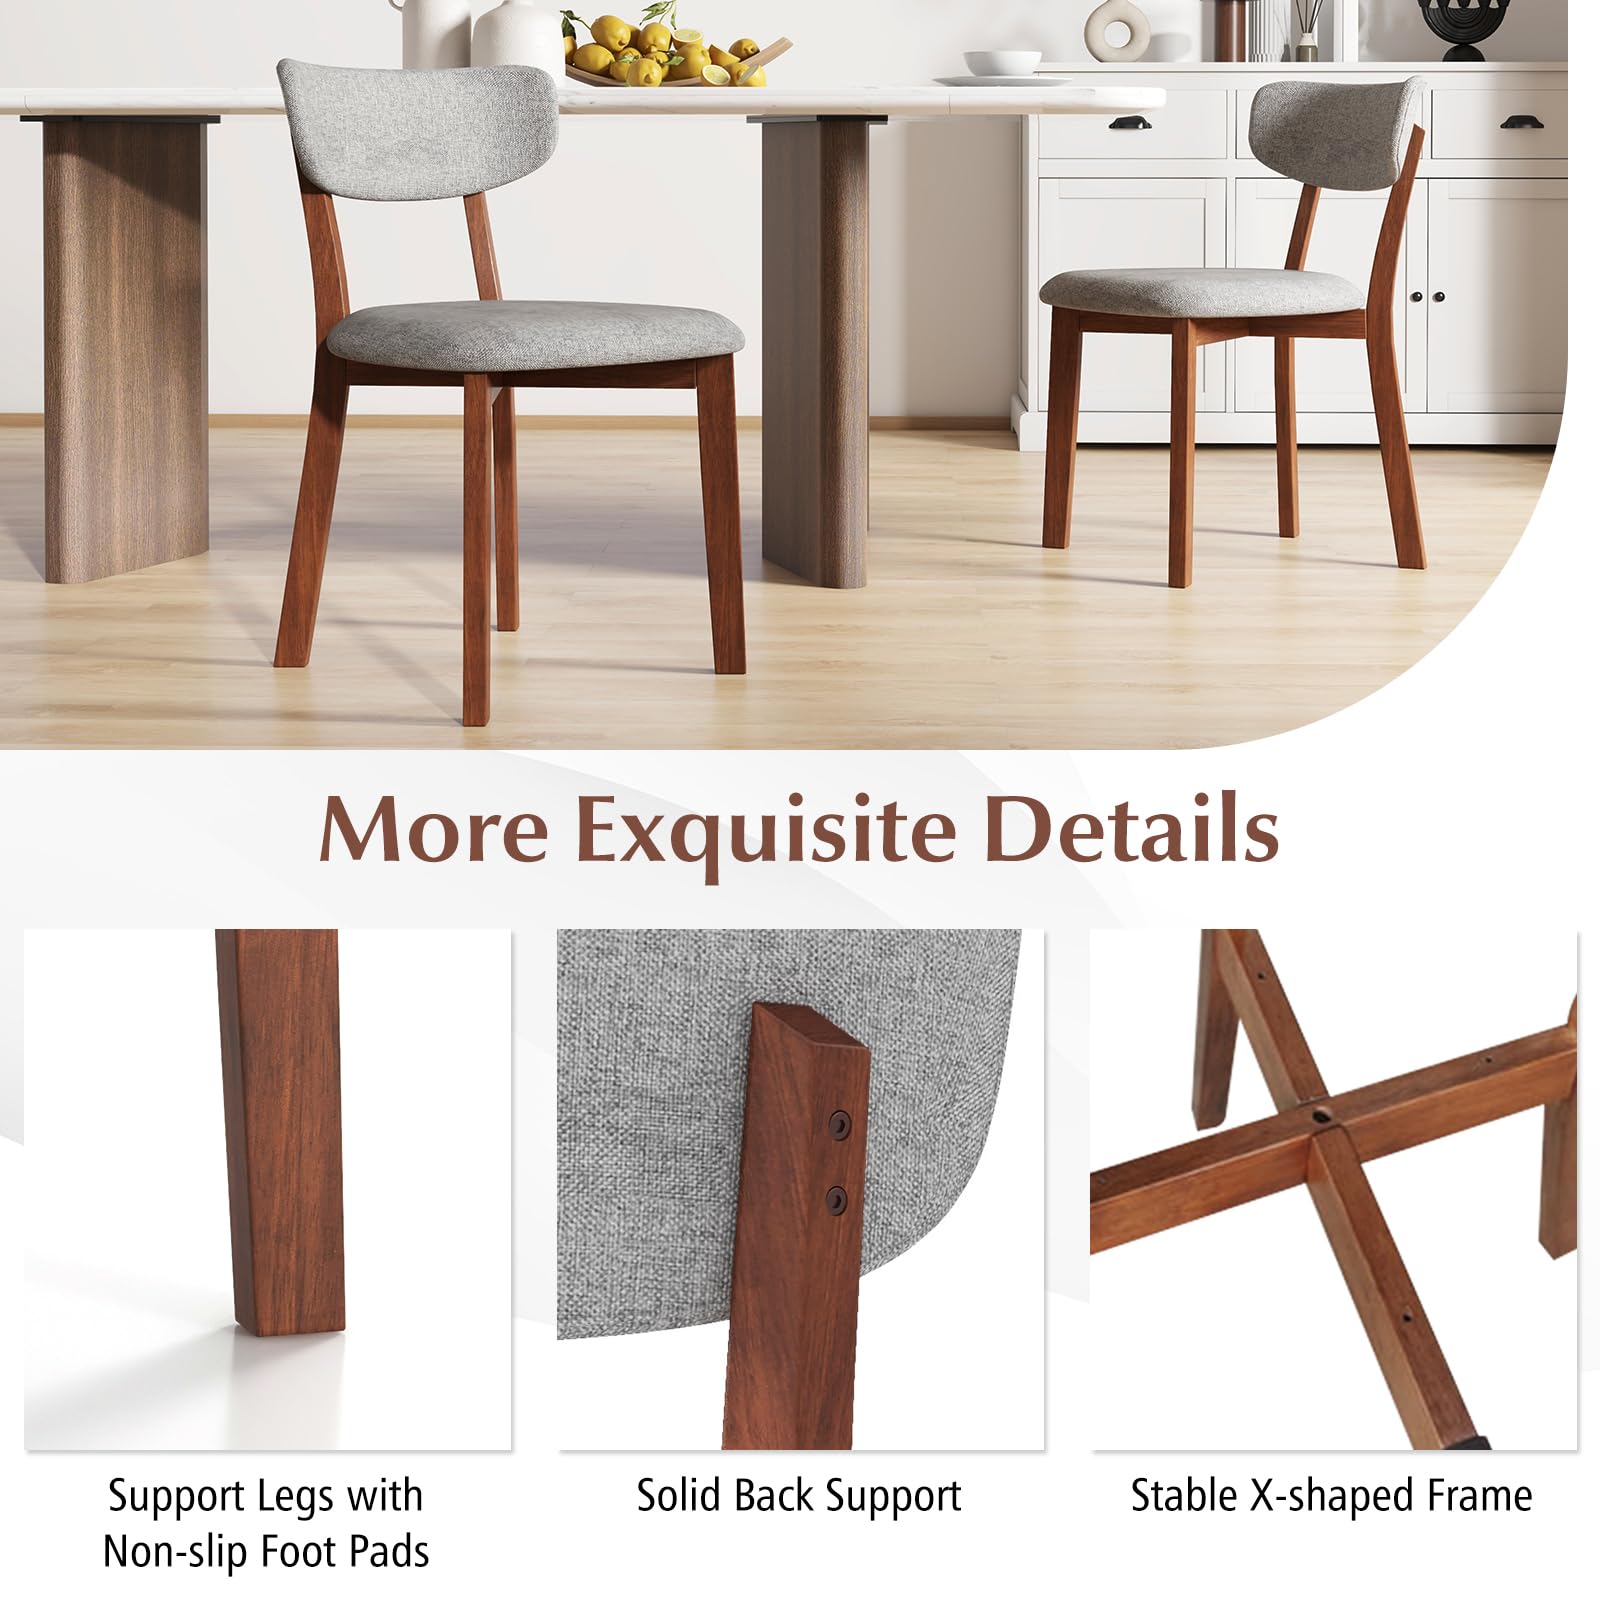 Giantex Wood Dining Chairs Set of 2, Farmhouse Wooden Dining Room Chair with Cushion Seat